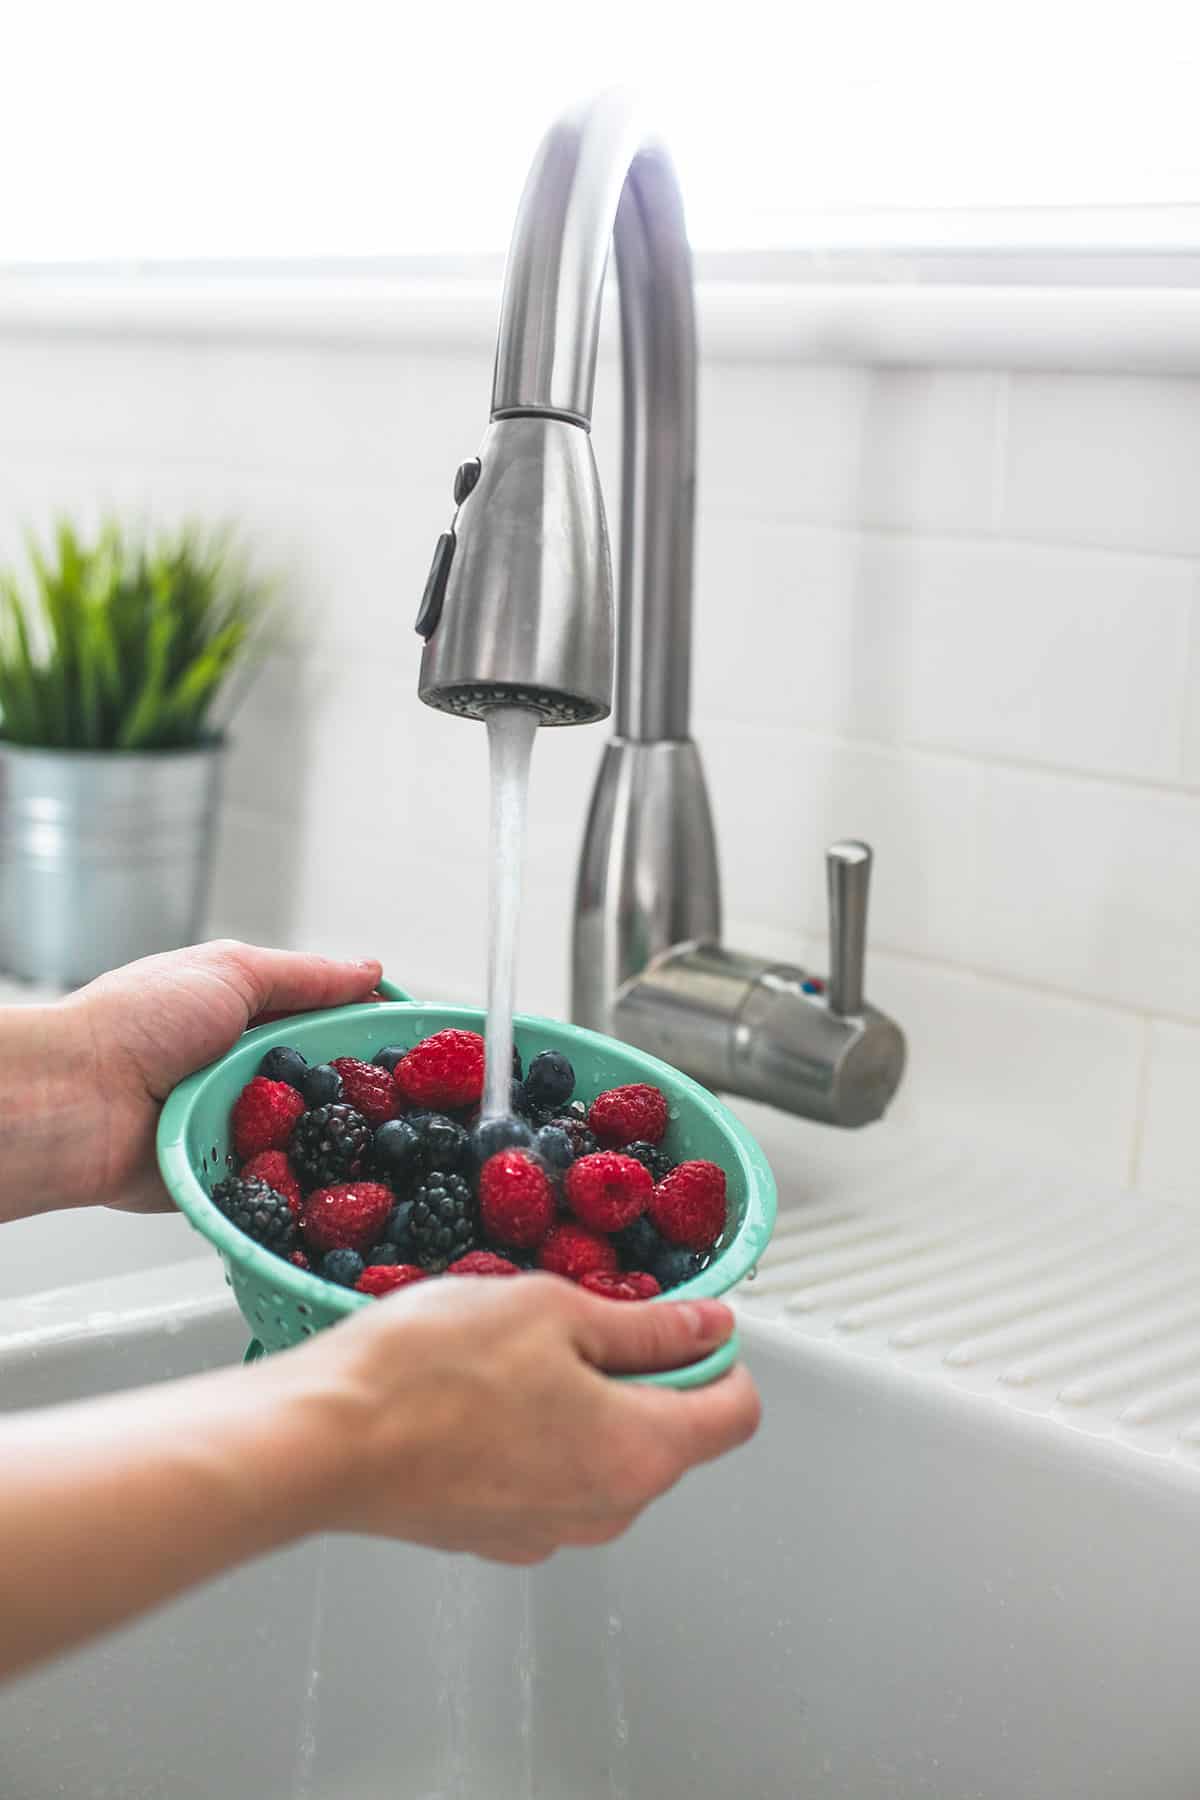 a hand holding a small colander full of mixed berries under a running faucet.